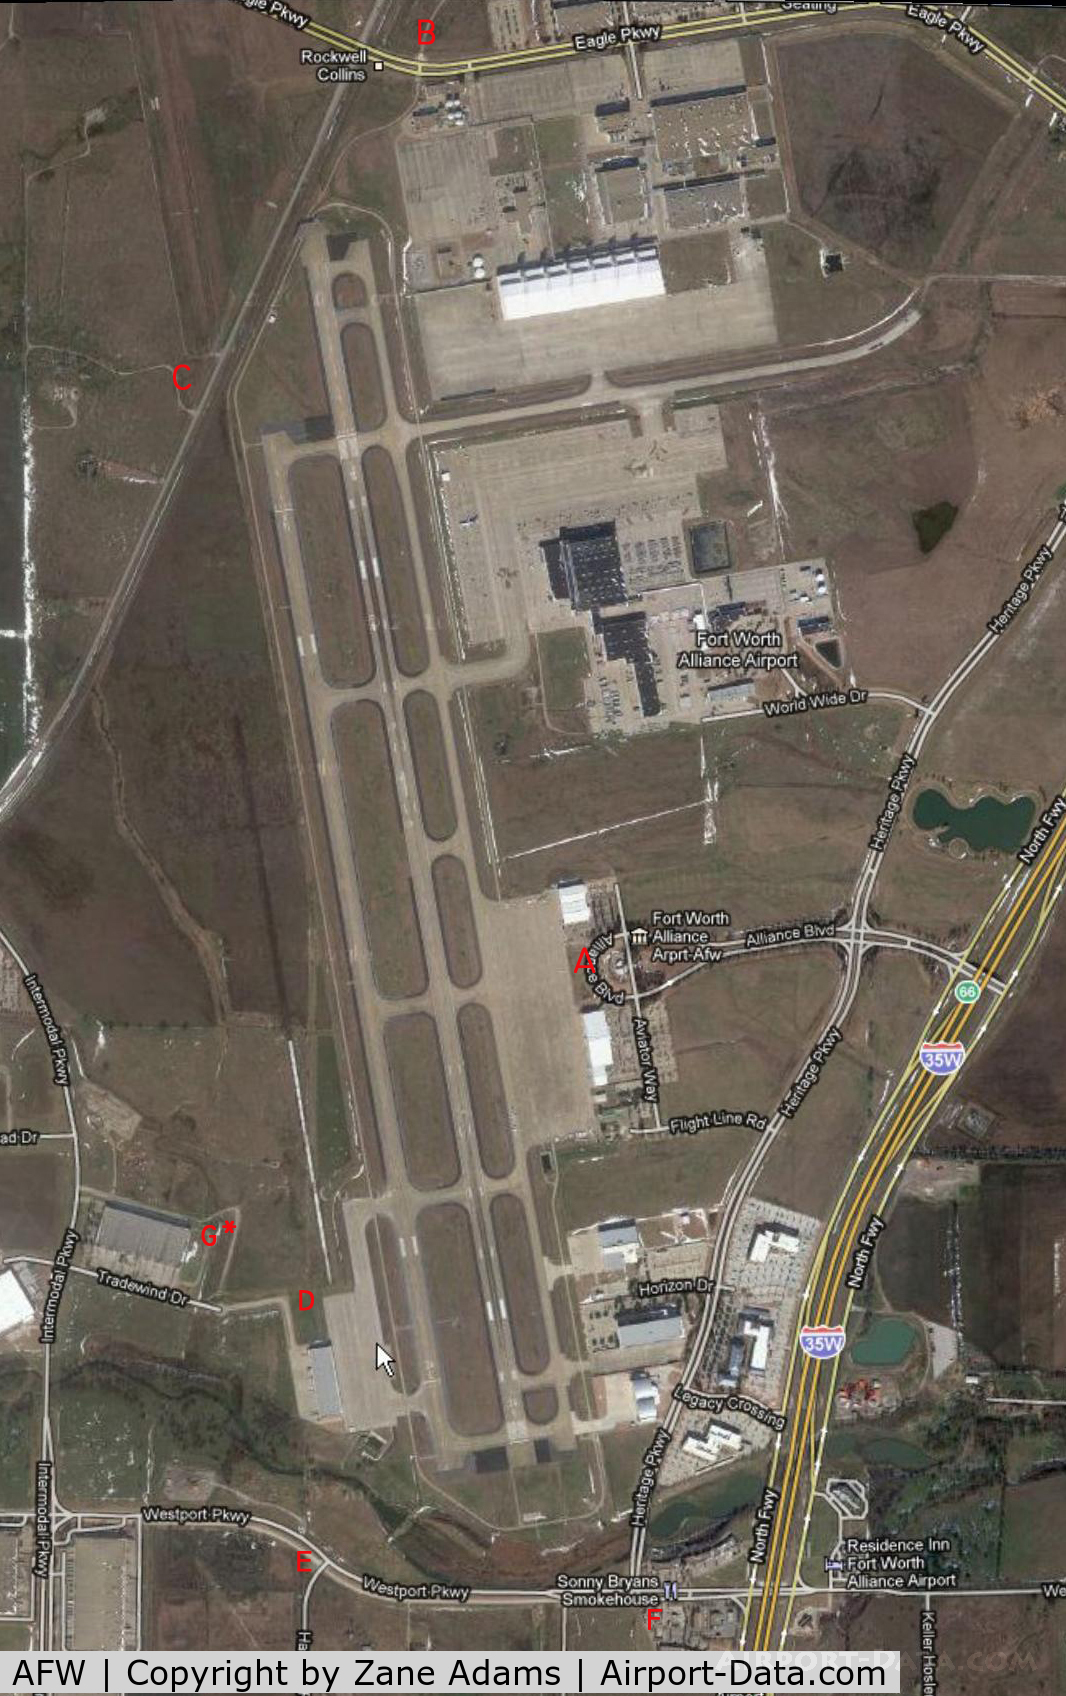 Fort Worth Alliance Airport (AFW) - Alliance Airport Spotting Map.
A. Very close to ramp.
B. AM approaches, 
C. PM approaches
D. PM Landings. Need ladder. may be asked to leave.
E. PM approaches 
F. AM approaches
G. Best PM Airshow spot. May be asked to leave. Maybe not ;)

